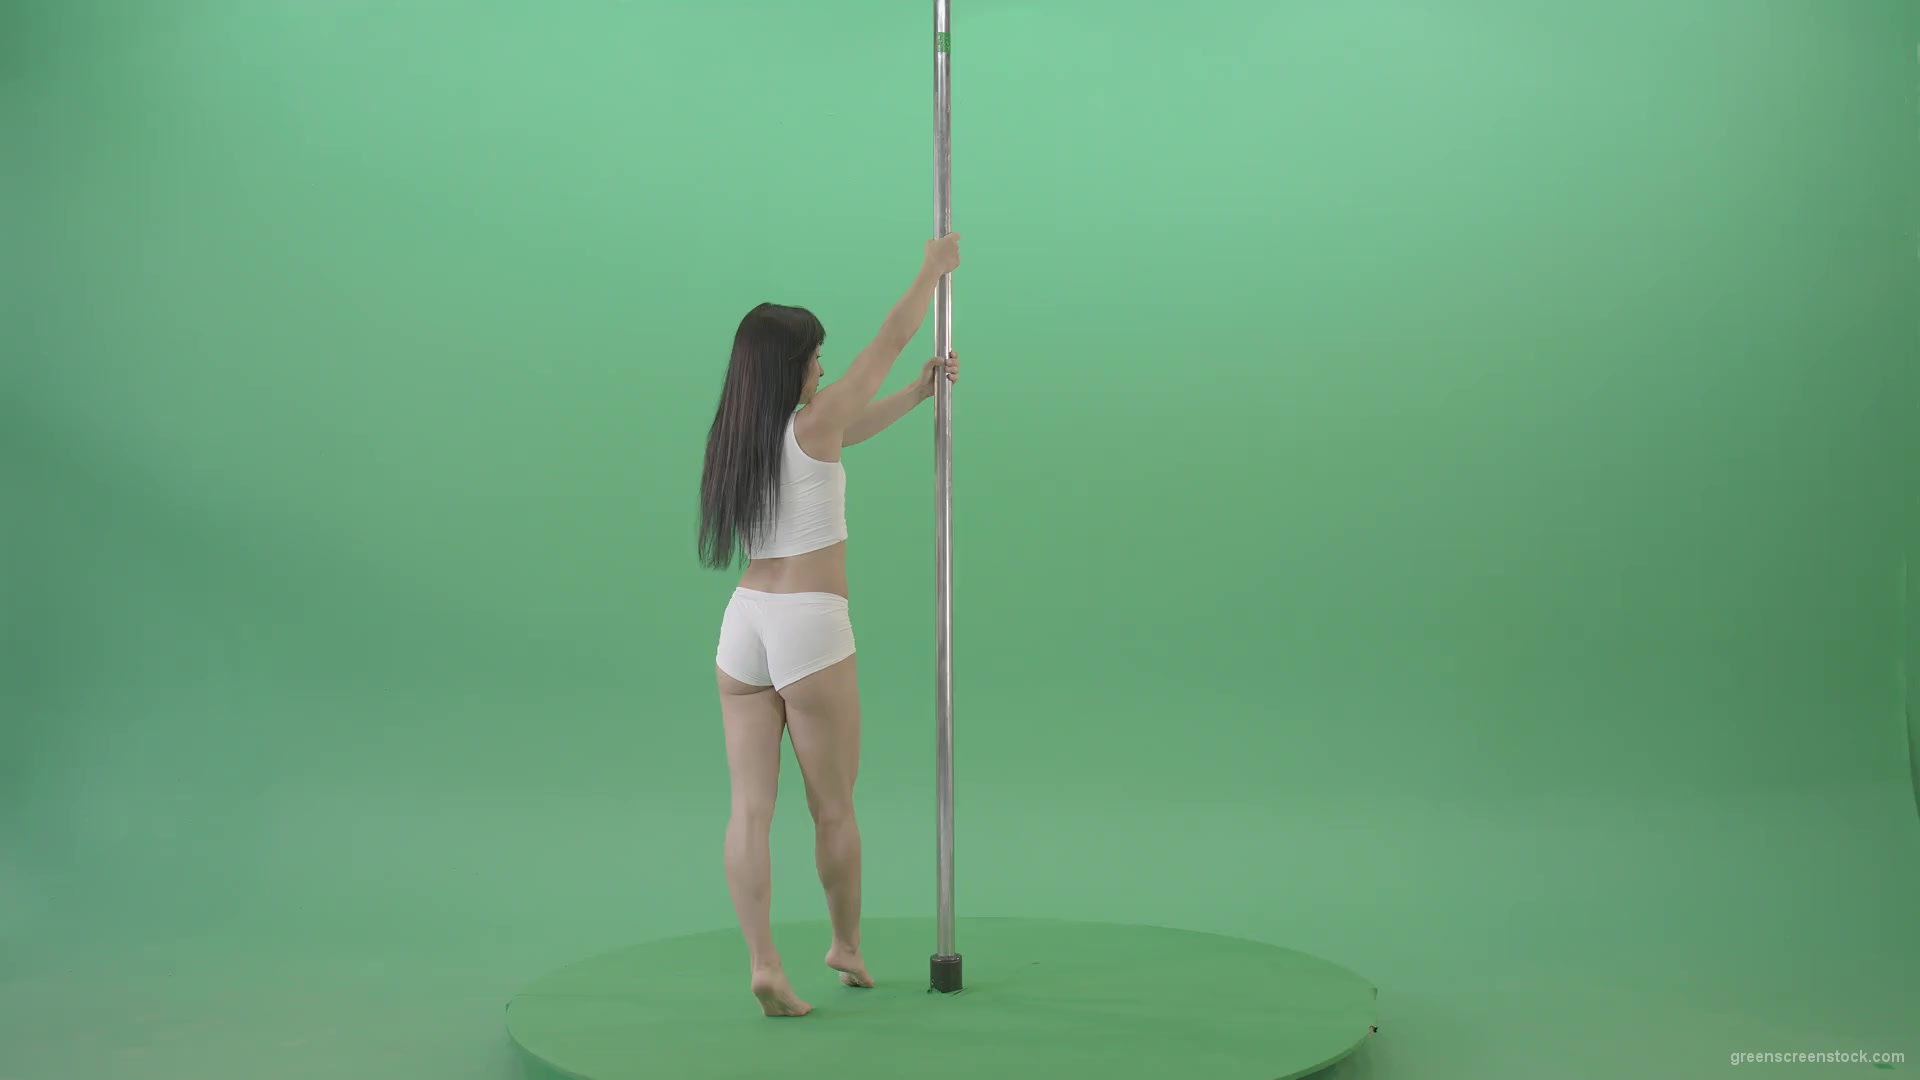 Green-Screen-Woman-spinning-gracefully-on-pole-dance-Video-Footage-1920_001 Green Screen Stock